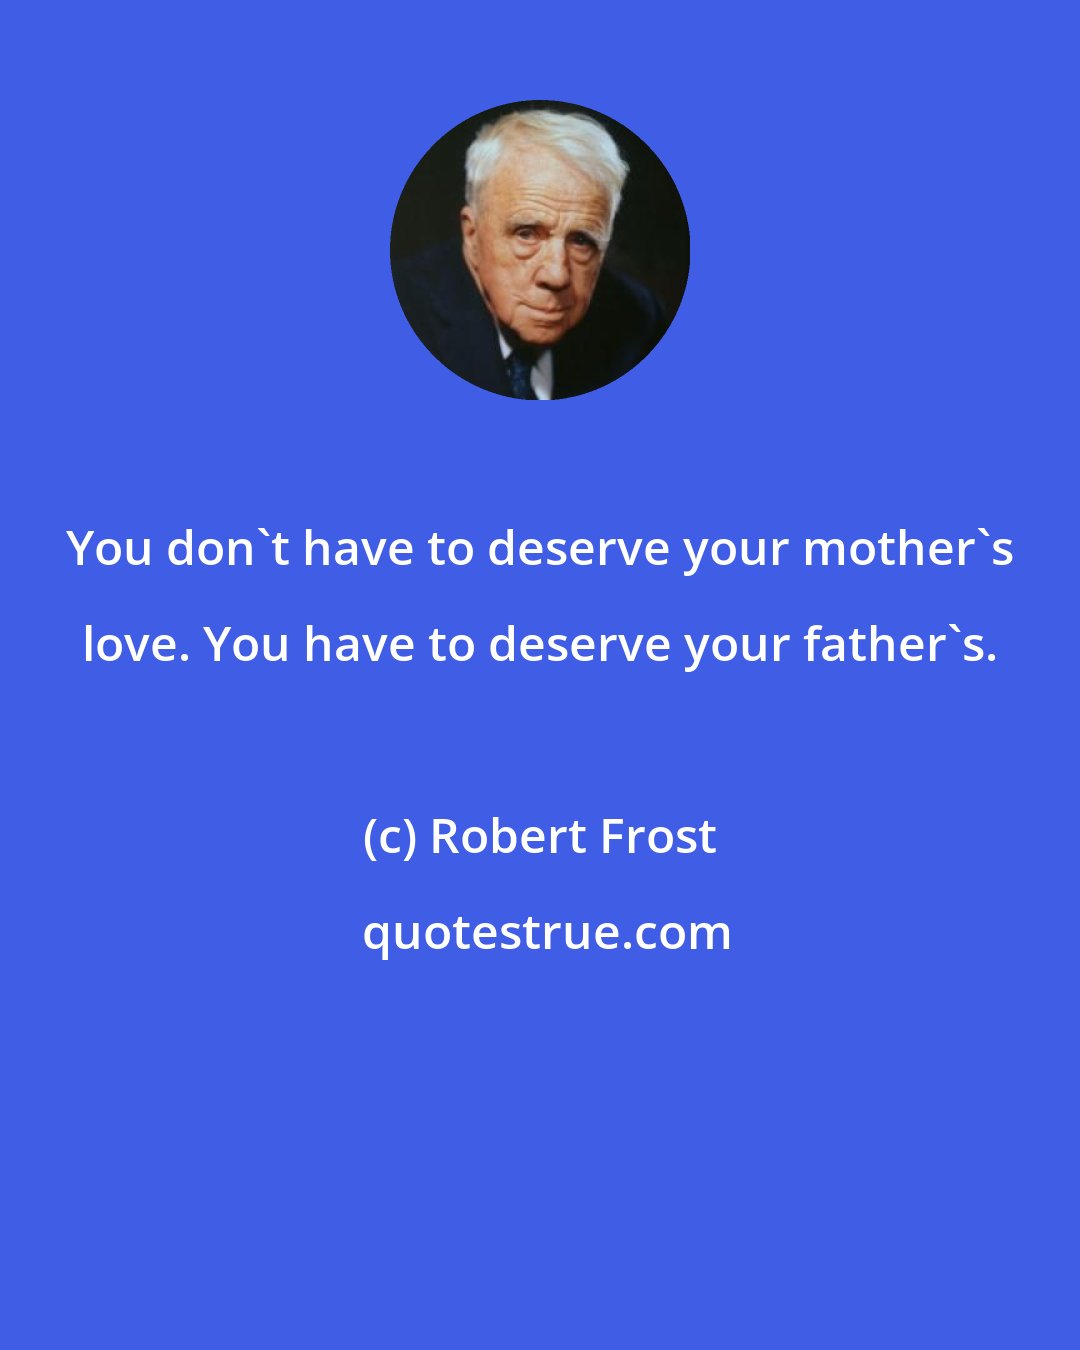 Robert Frost: You don't have to deserve your mother's love. You have to deserve your father's.